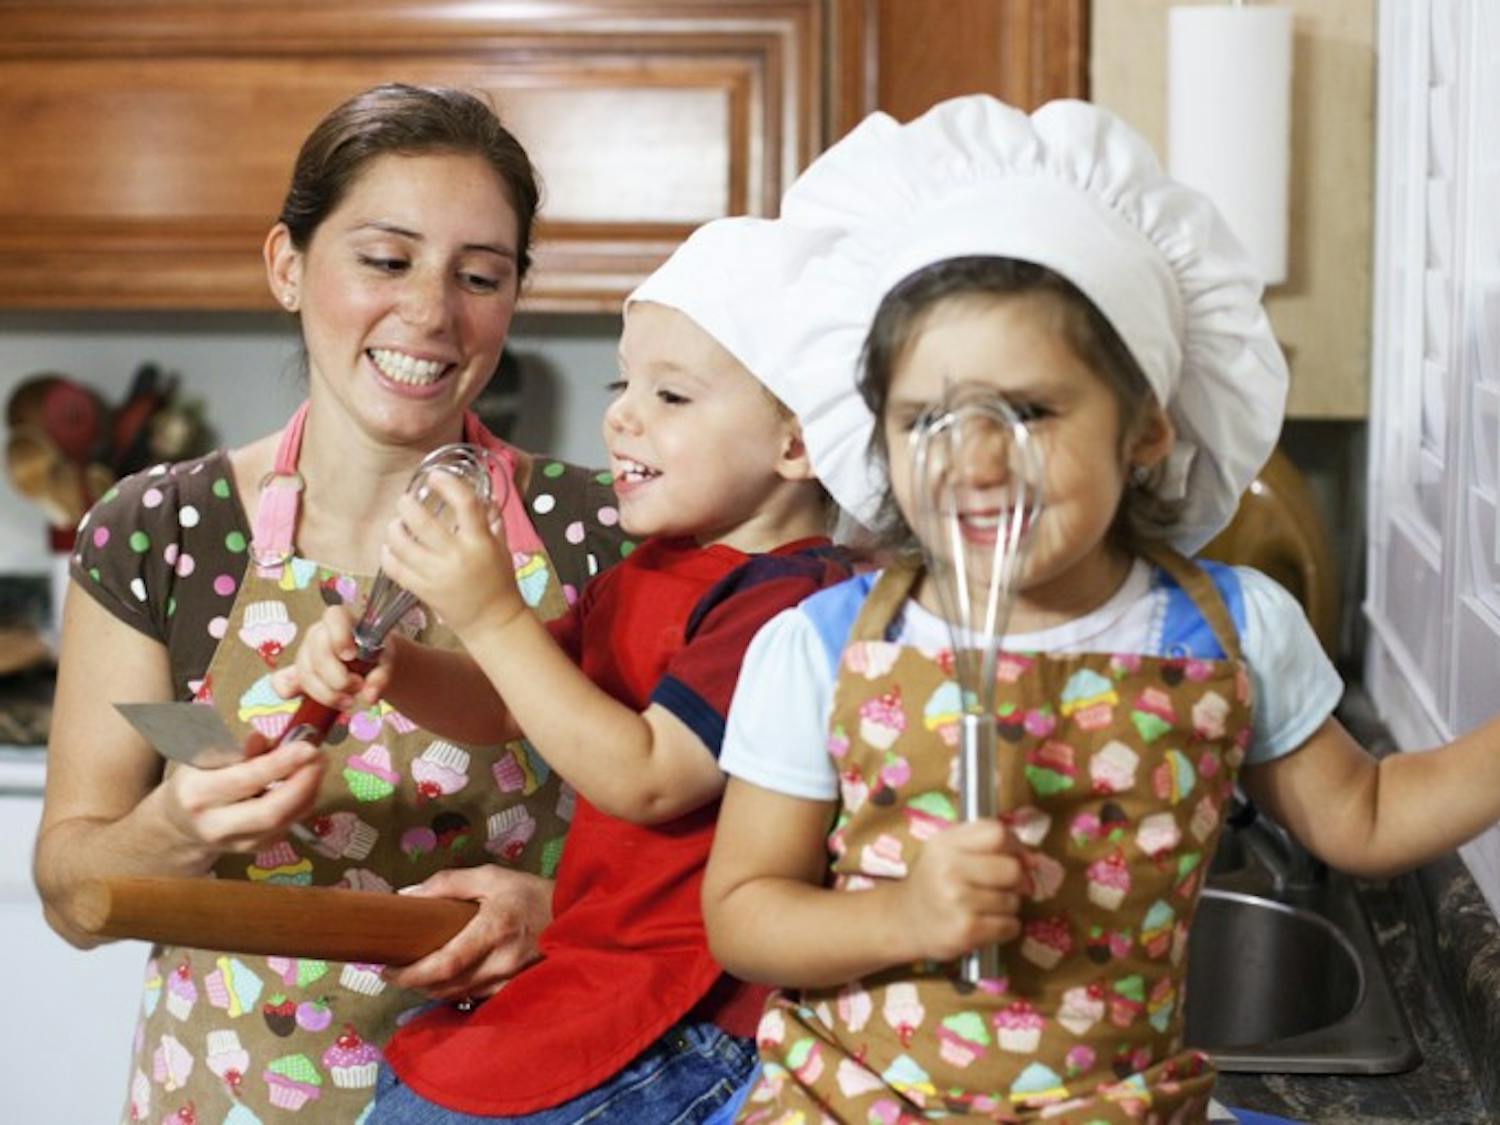 Sherrie Blackwelder’s children Isabella, 4, and Ira, 2, wield their favorite baking utensils with their mother on Monday night at their home in Gainesville. Blackwelder makes cakes and other desserts out of her home for her business, Cake Classics.